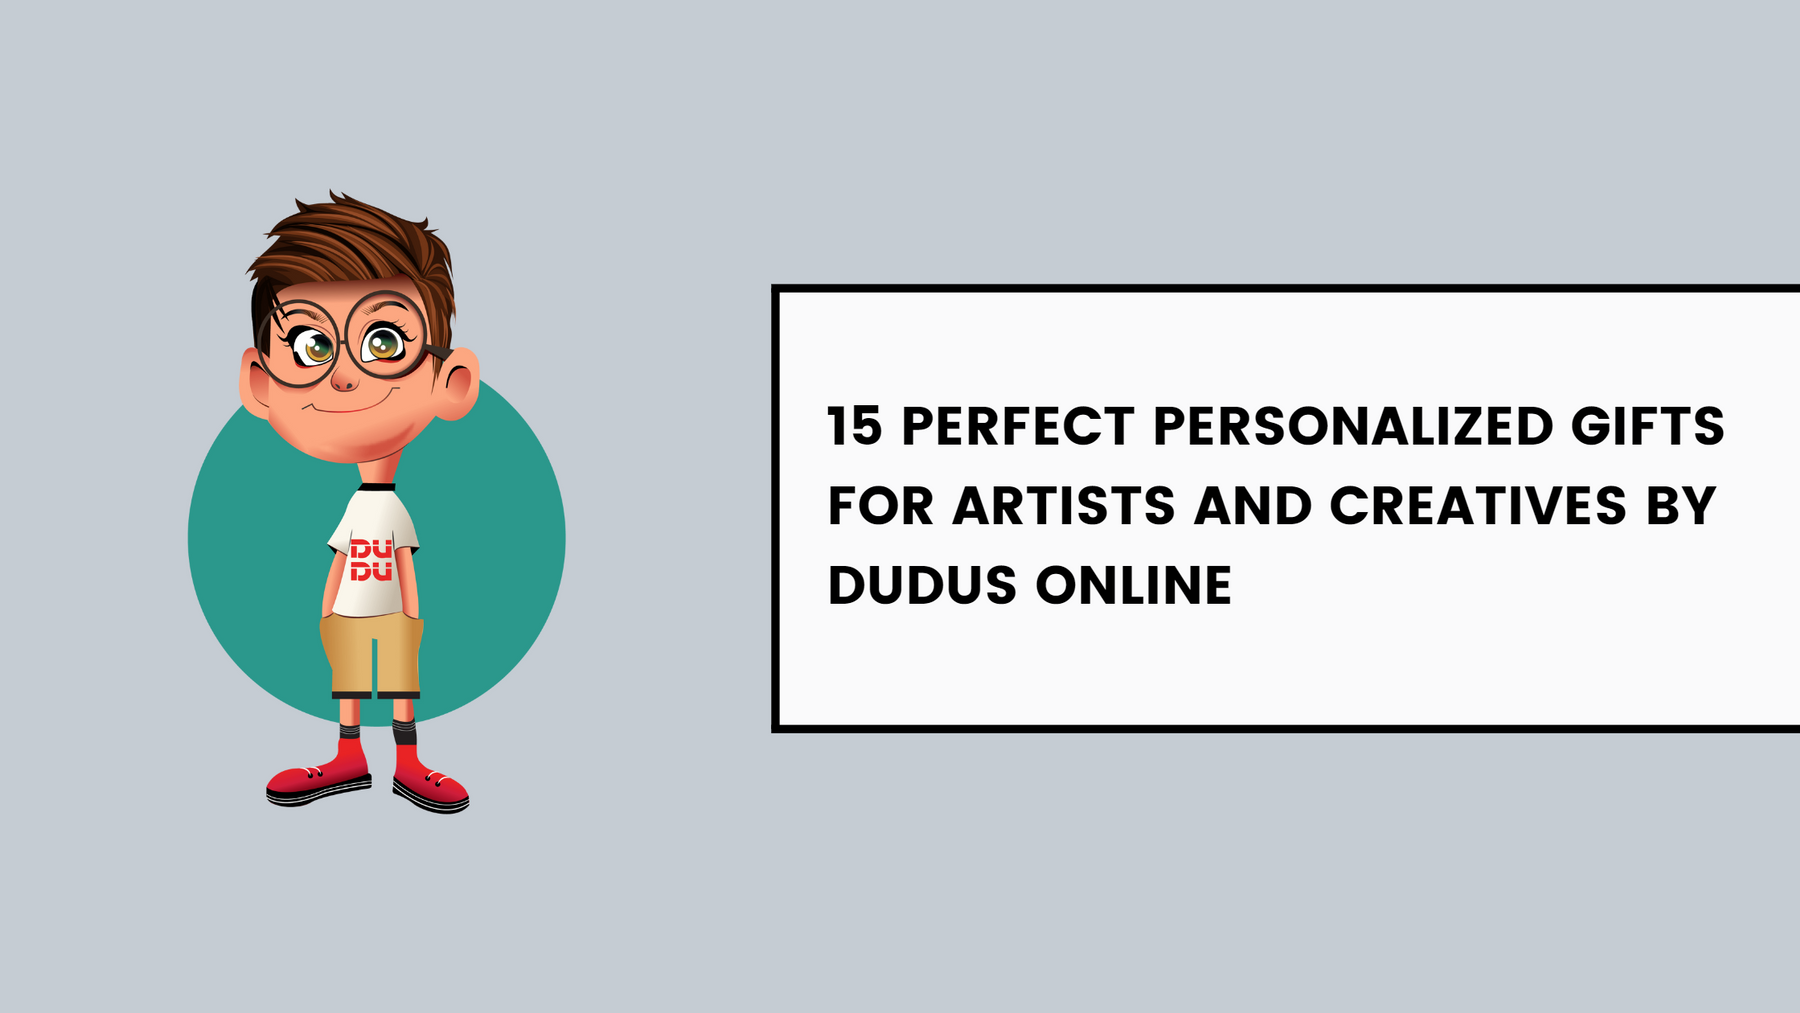 15 Perfect Personalized Gifts For Artists And Creatives By Dudus Online